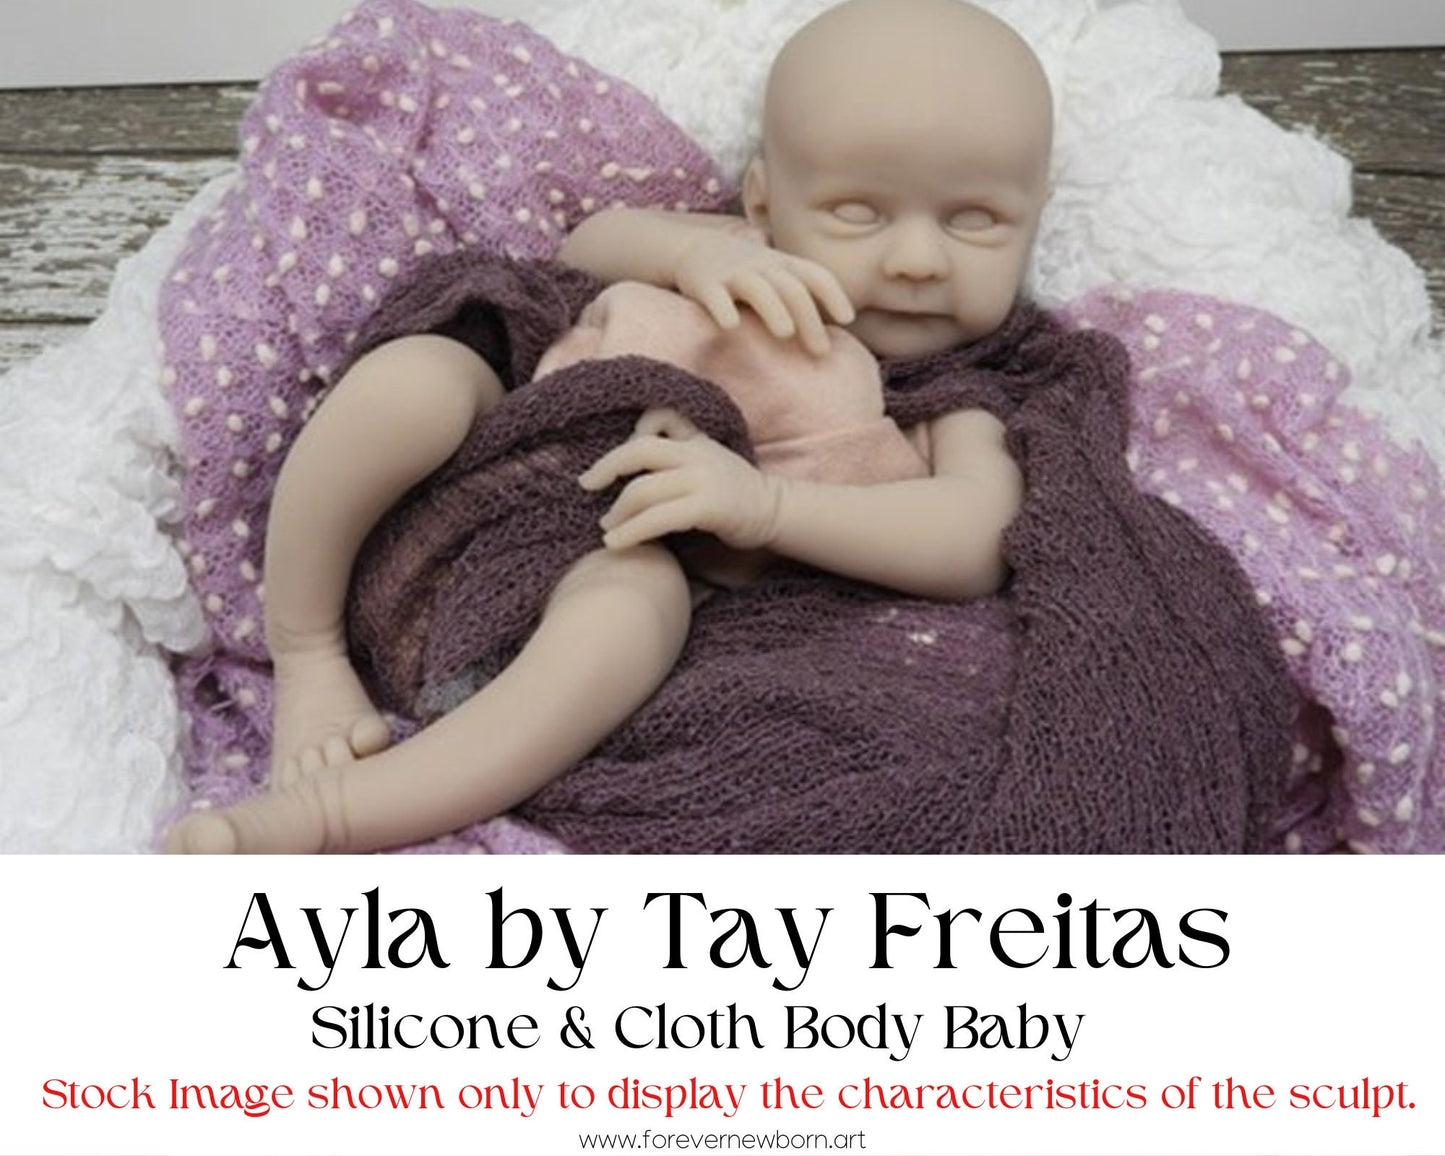 SiLiCoNe BaBy Ayla by Tay Freitas (16"+ Full Limbs) with cloth body. Extended Processing Time May Be Required. ASK FIRST!